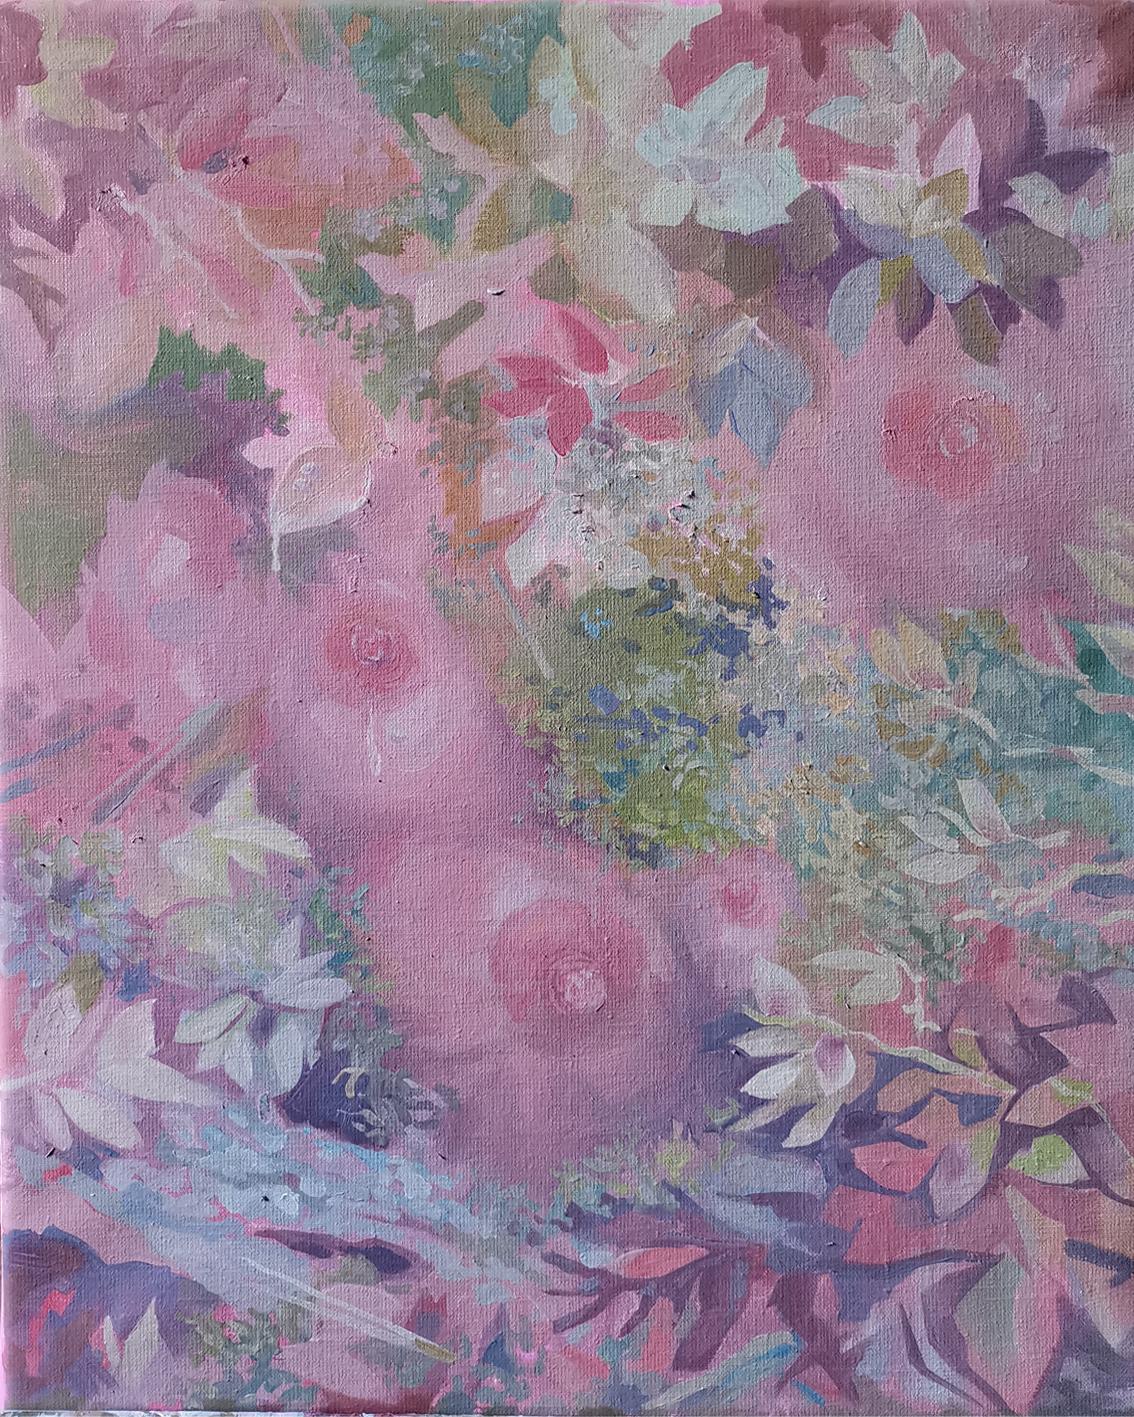 After the rain, 50x40cm, oil/canvas - Painting by Polina Surovova